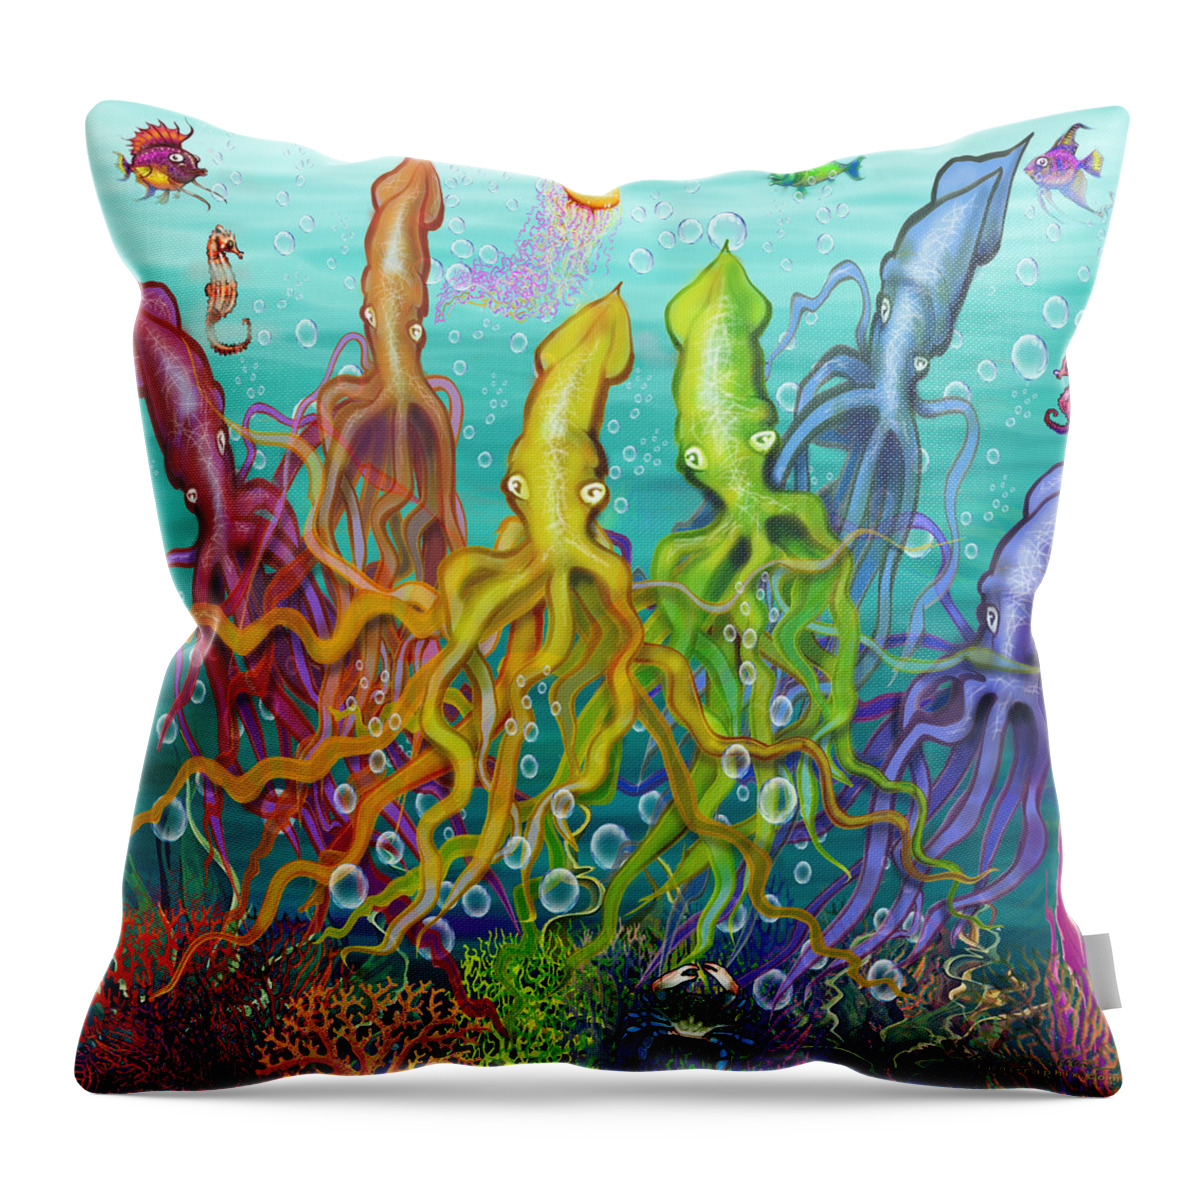 Squid Throw Pillow featuring the digital art Colorful Calamari by Kevin Middleton